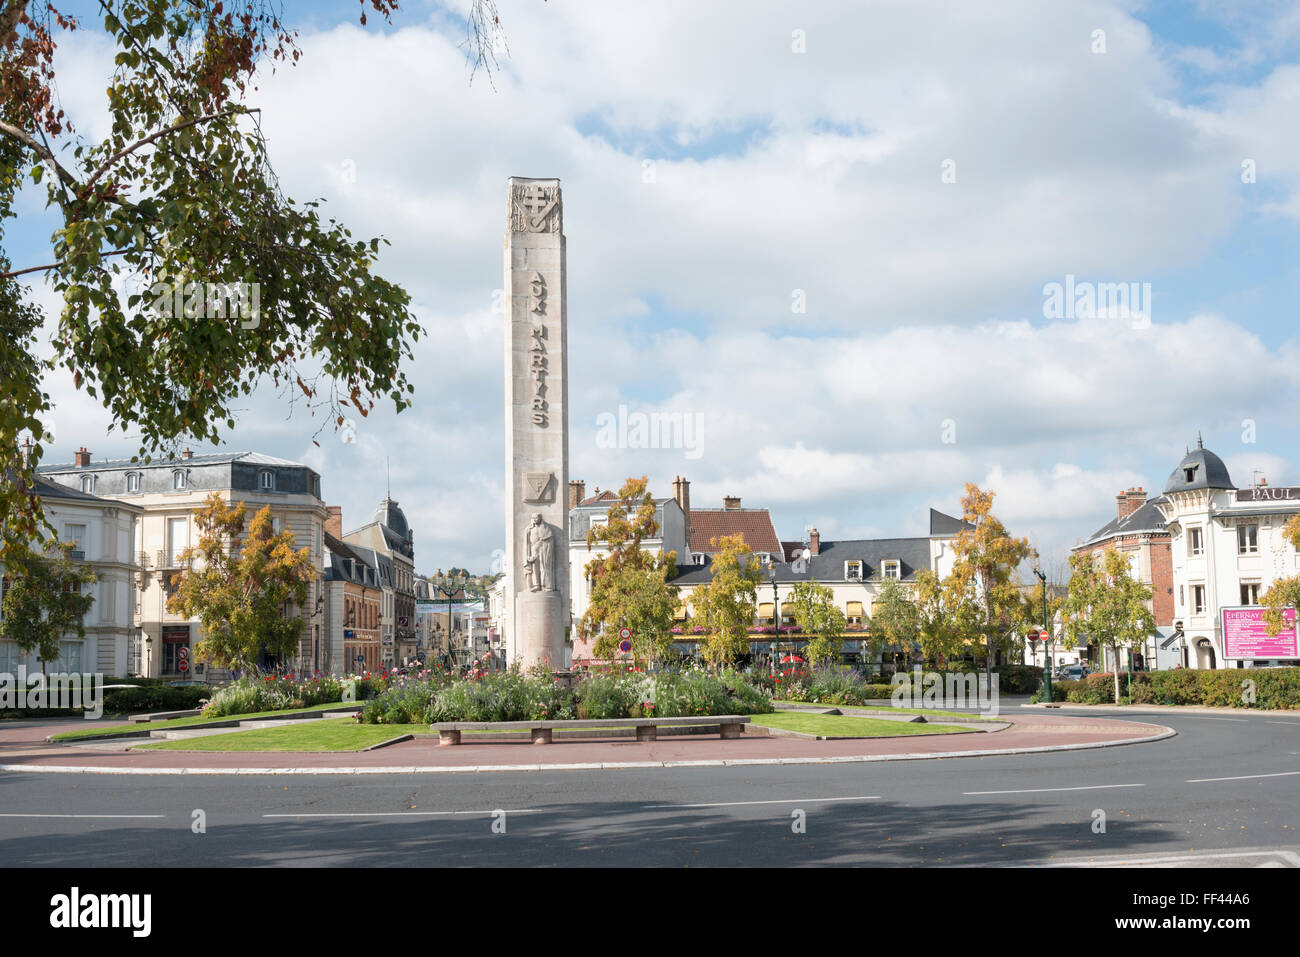 A street scene in Epernay France the capital of the champagne area showing the World War II memorial Stock Photo